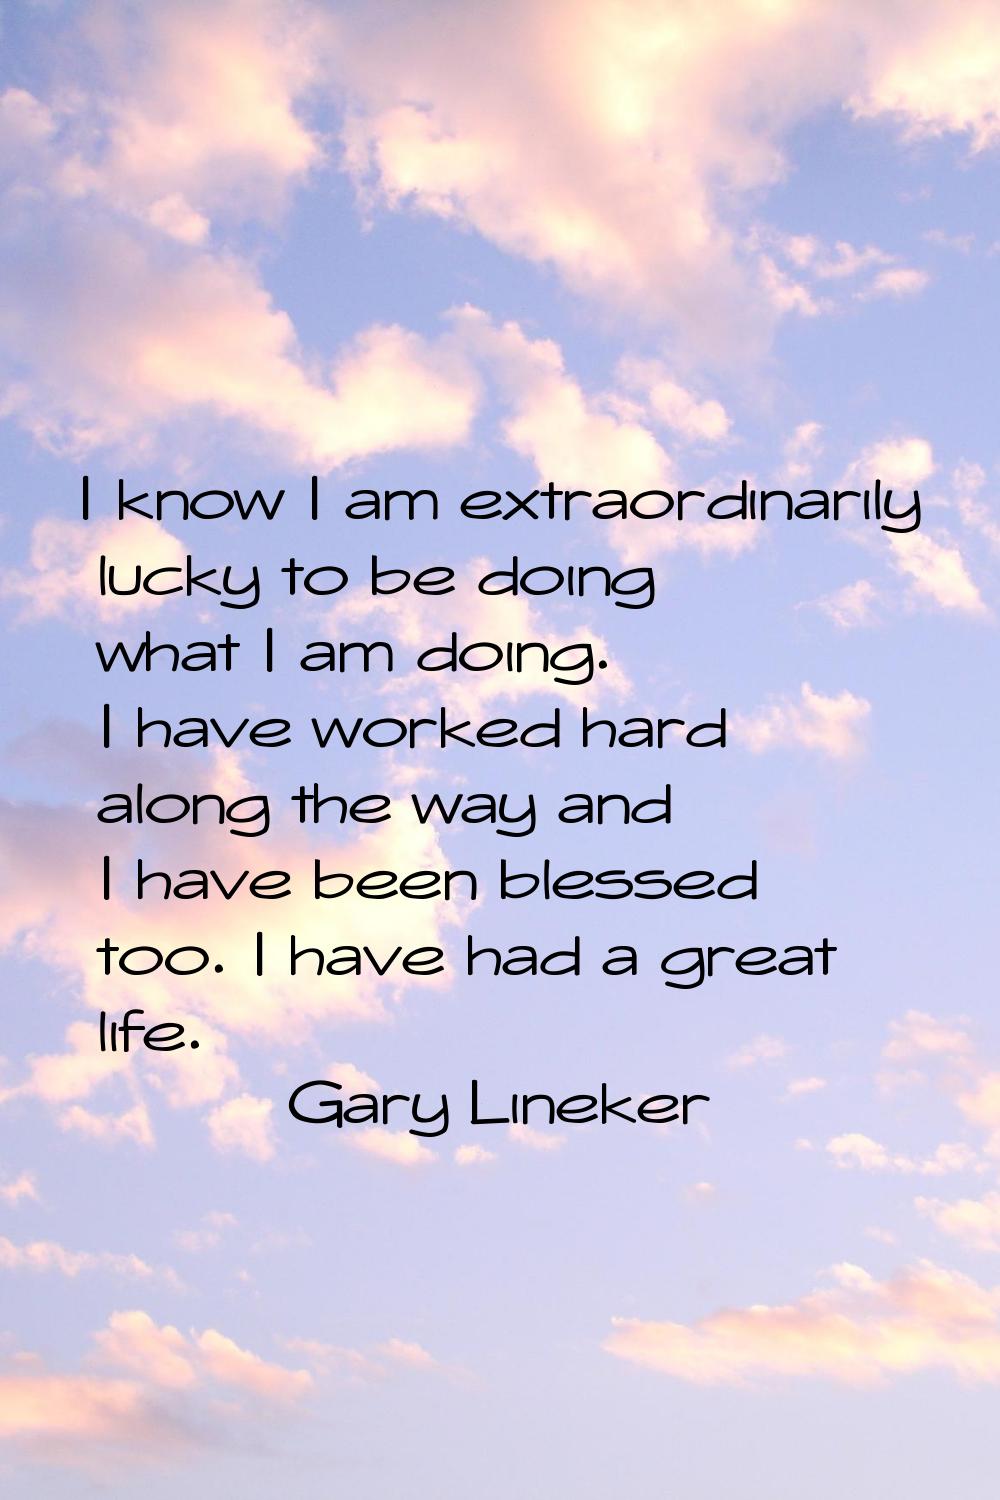 I know I am extraordinarily lucky to be doing what I am doing. I have worked hard along the way and